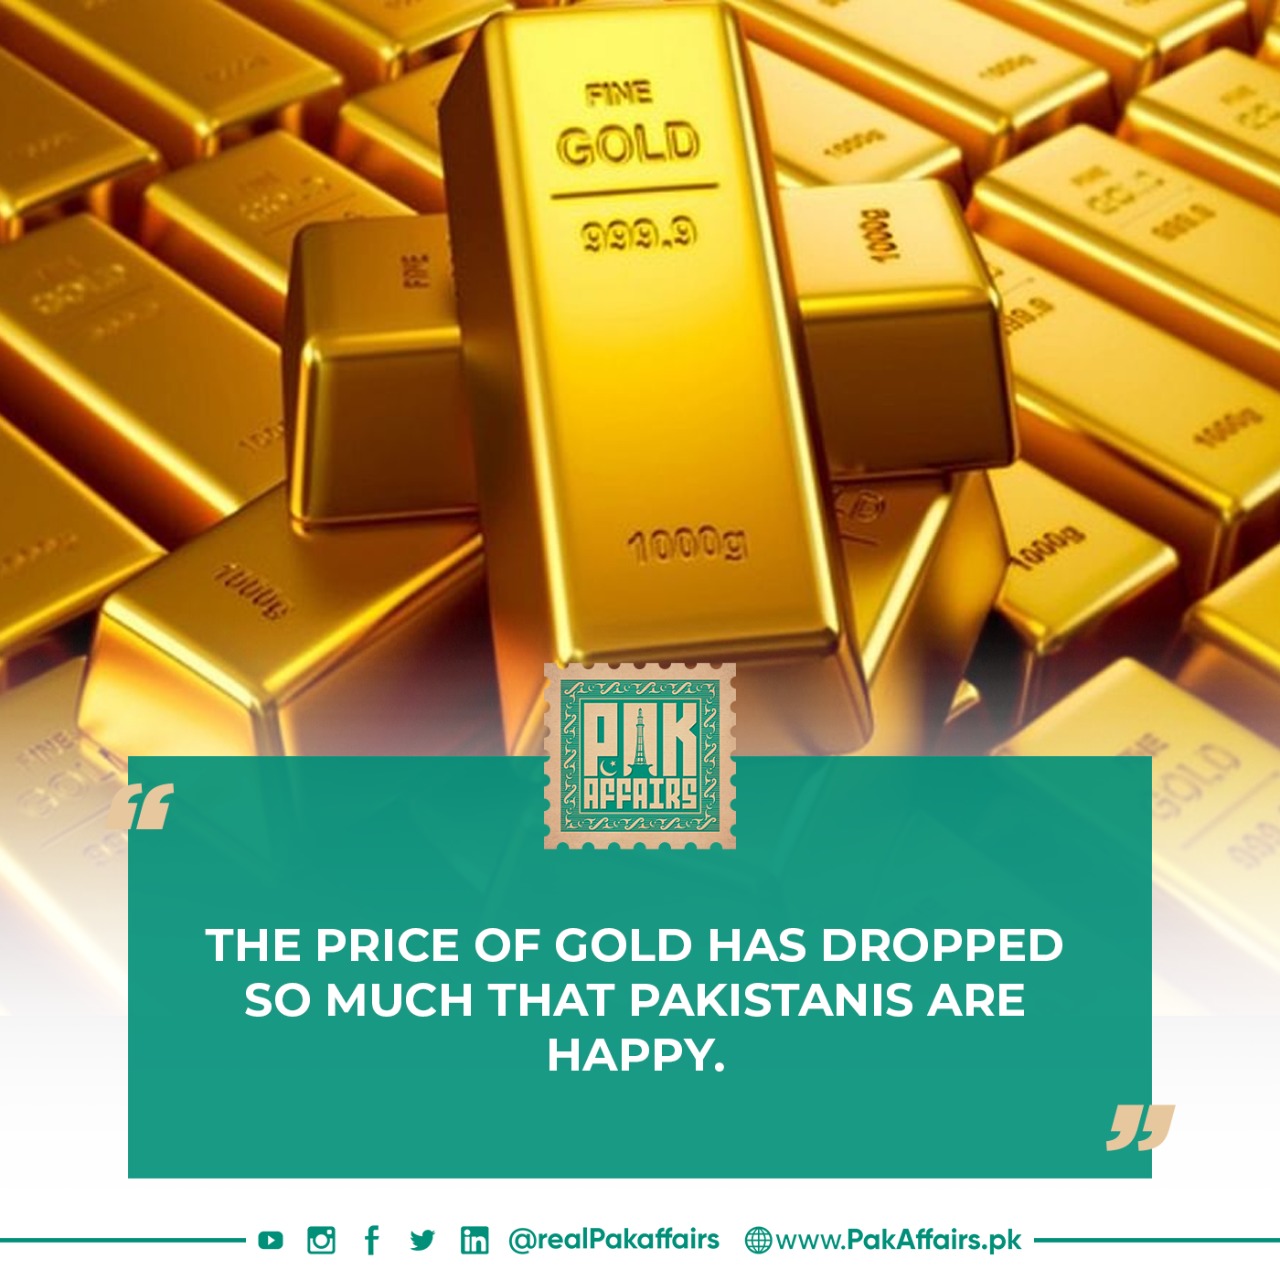 The price of gold has dropped so much that Pakistanis are happy